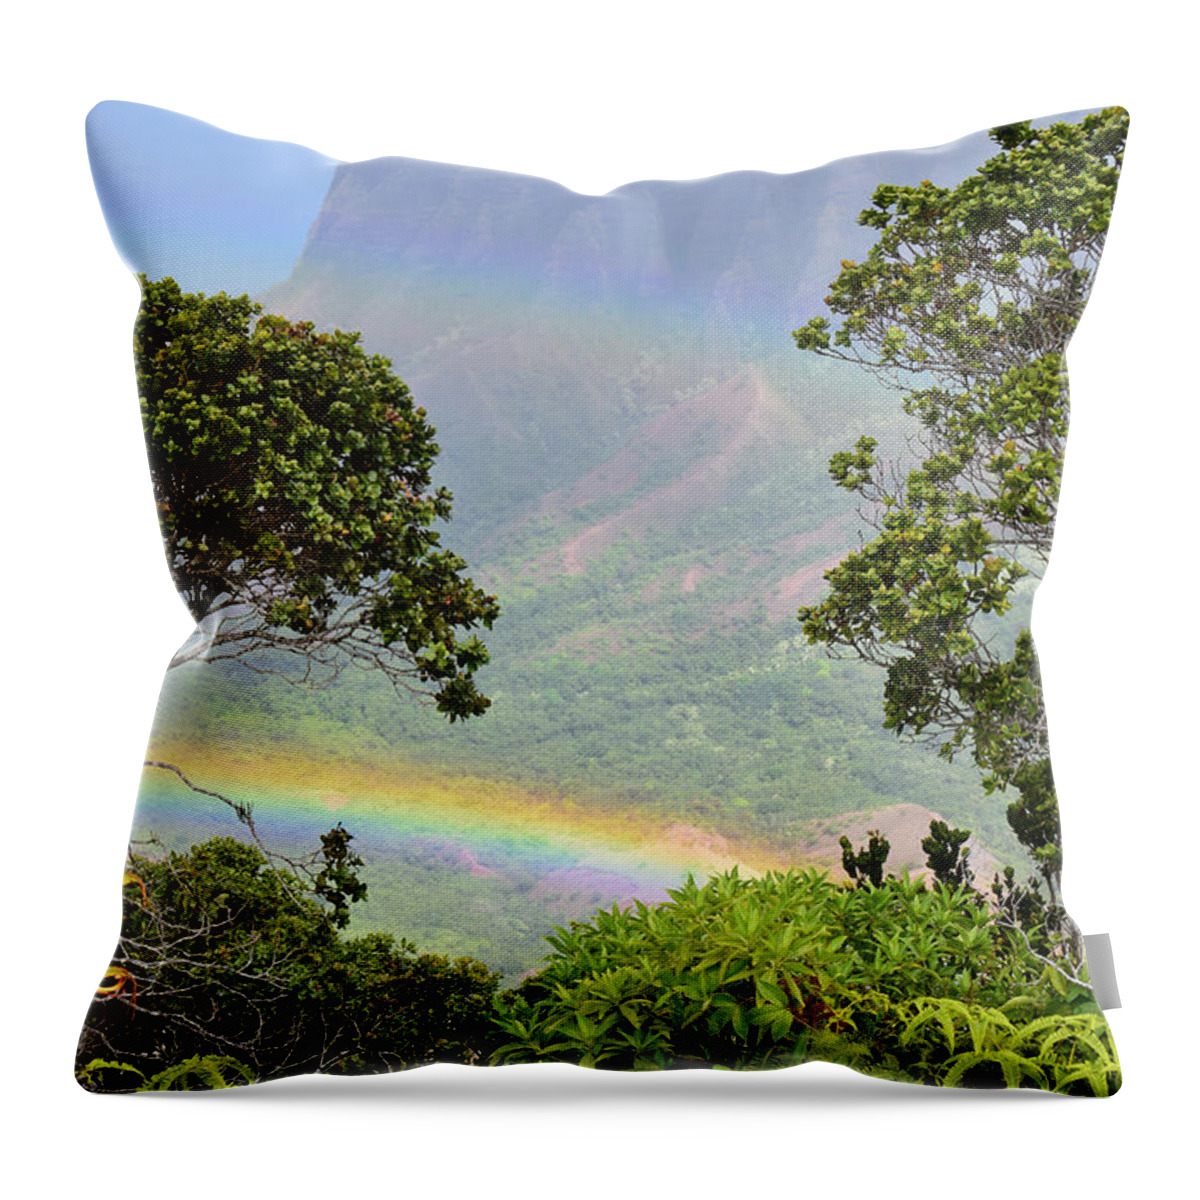 Gary Throw Pillow featuring the photograph Kalalau Lookout Rainbow by Gary F Richards